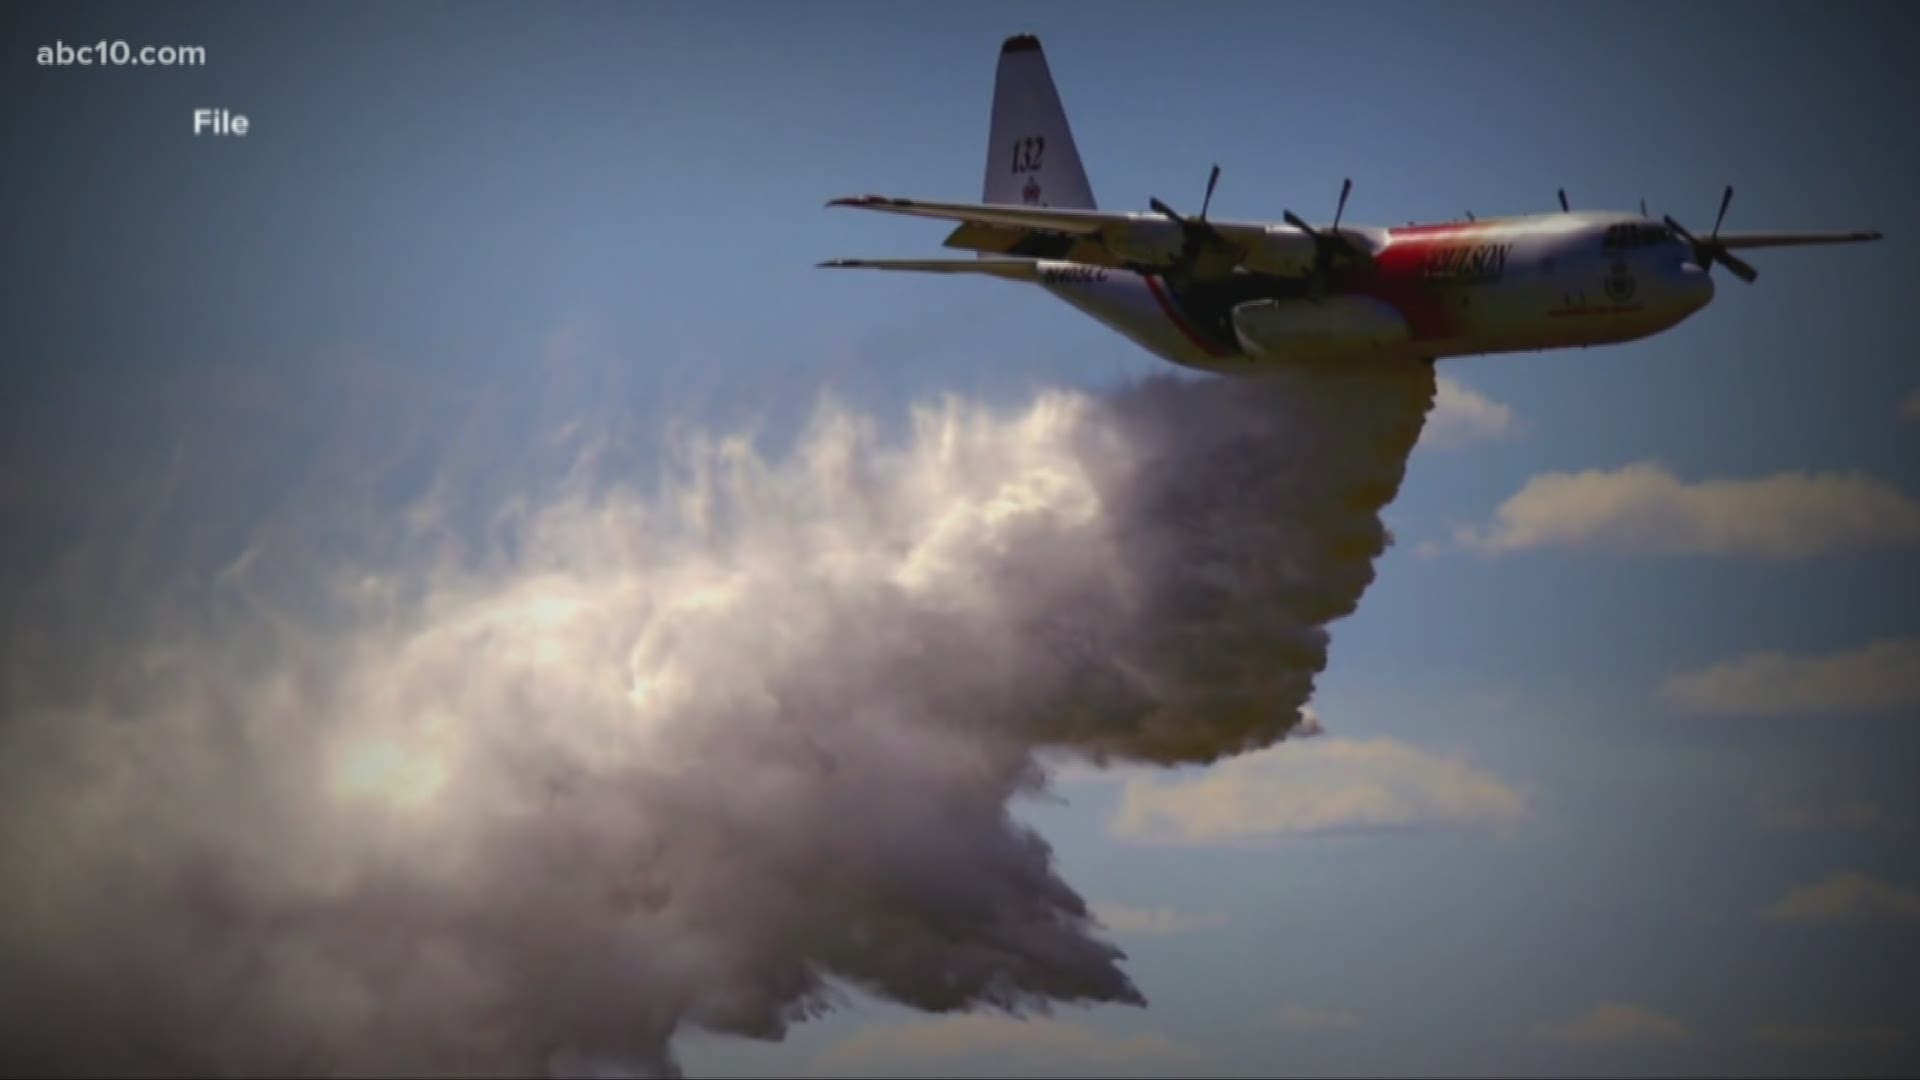 Three firefighters were helping fight wildfires in Australia when a C-130 Hercules aerial water tanker crashed.